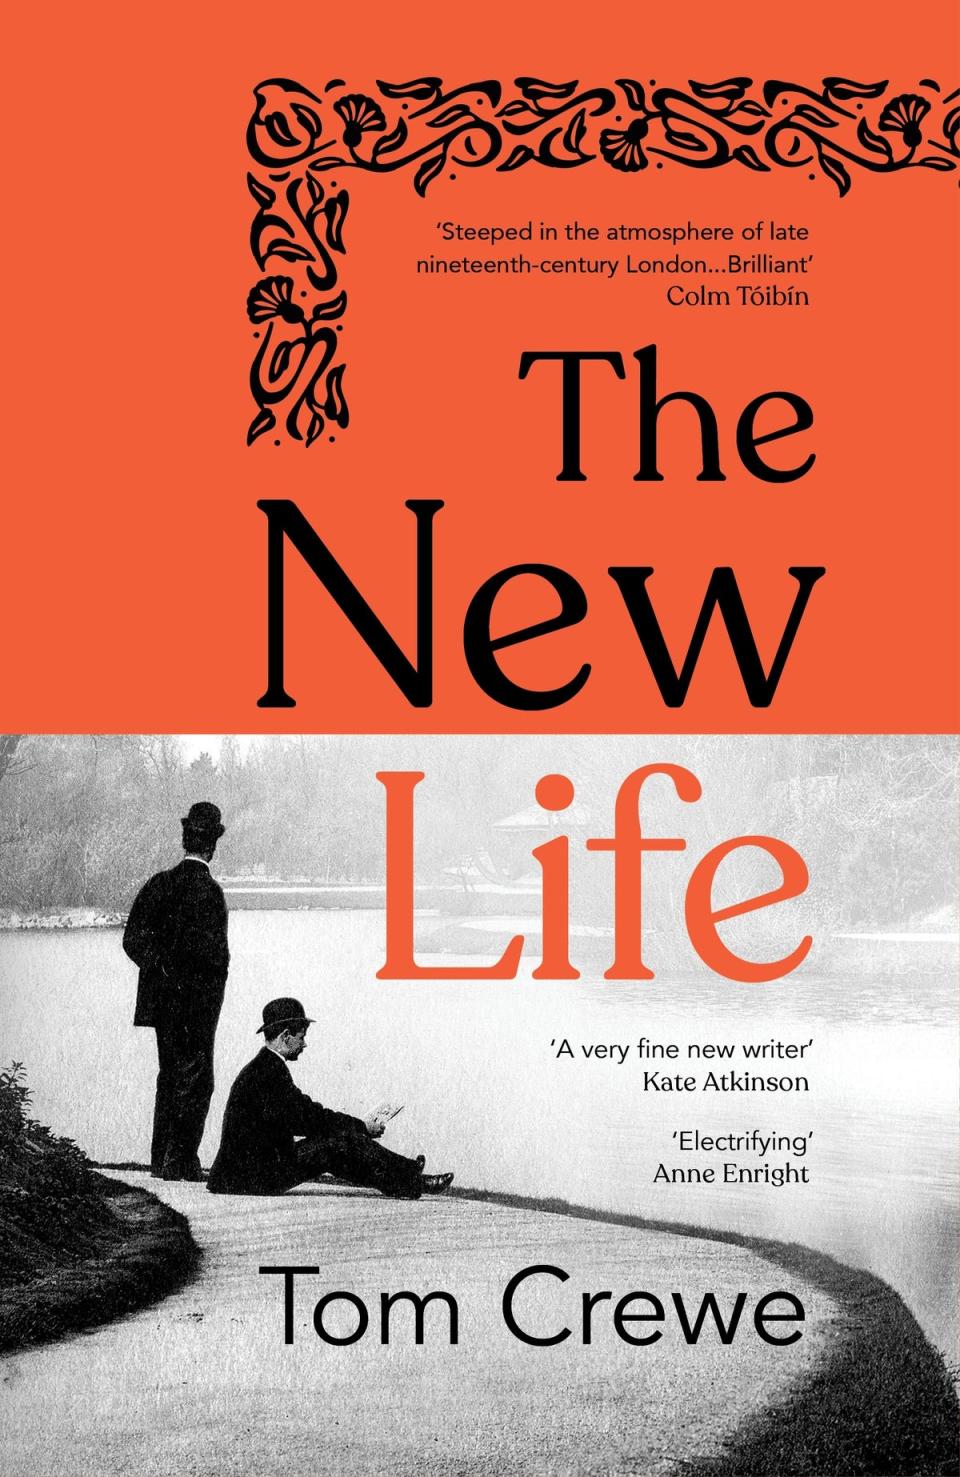 Tom Crewe’s ‘The New Life’ (Chatto & Windus)